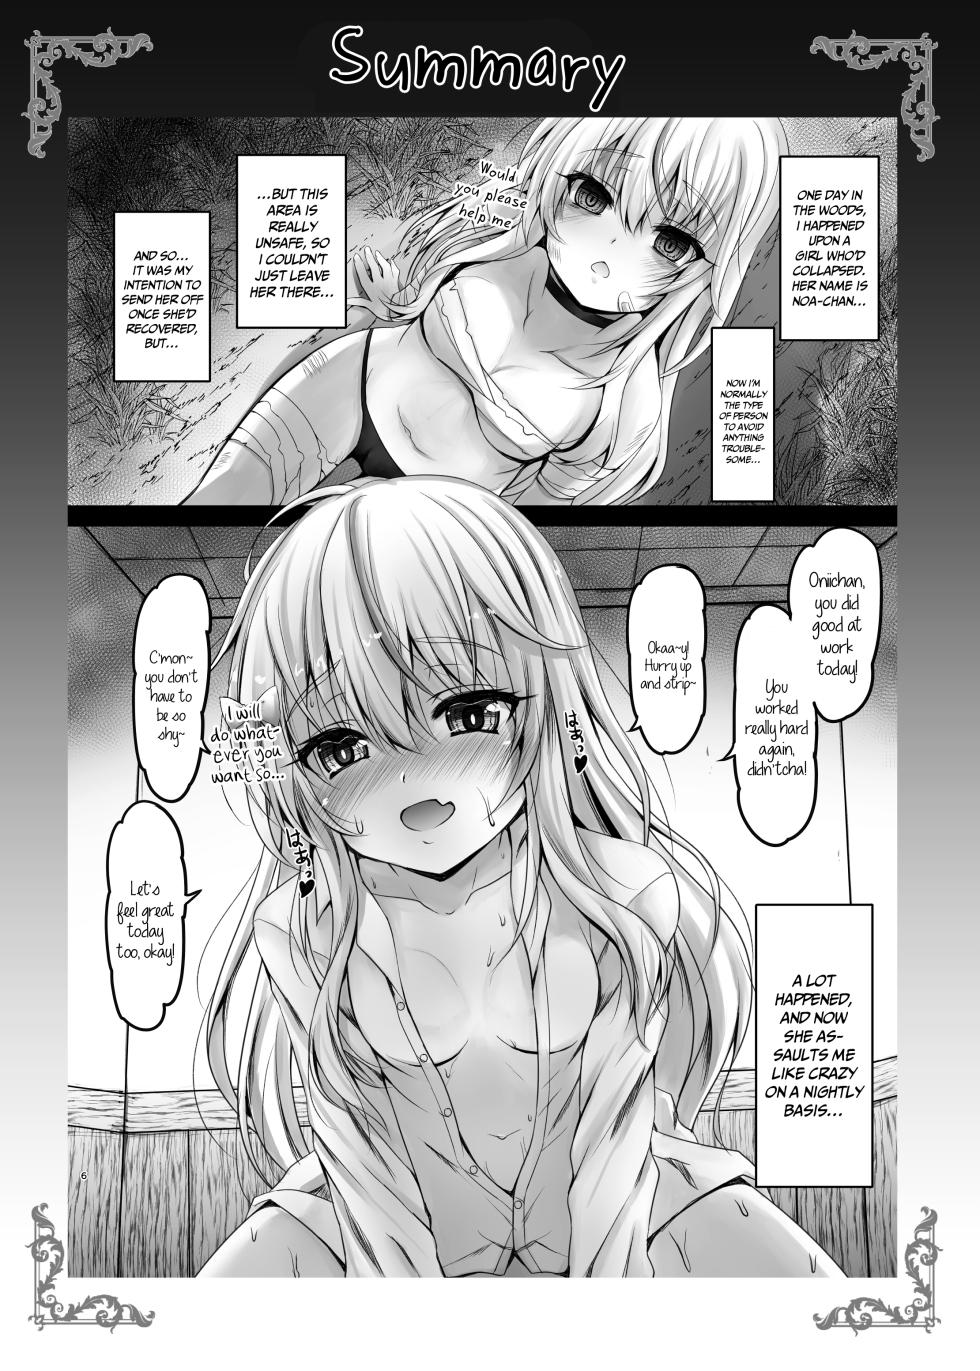 [SHINING (Shaian)] The Girl I Rescued in Another World is Assaulting Me Relentlessly Every Night and Its Bothering Me First Night [English] {Doujins.com} [Digital] - Page 4